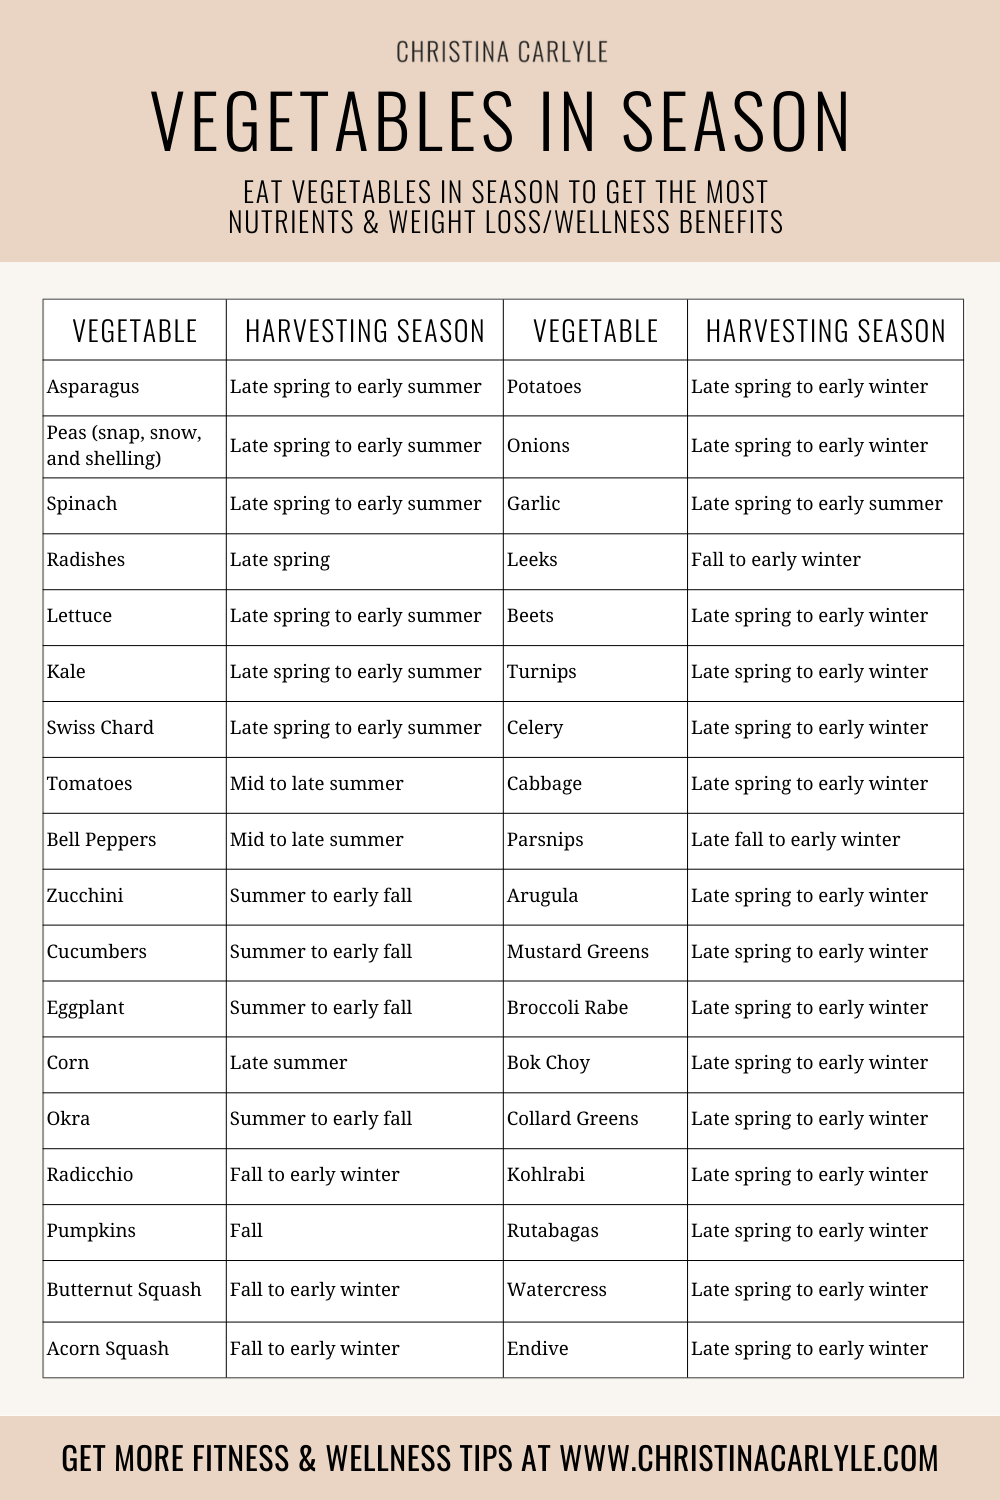 text that says Vegetables in Season and a table with 40 different vegetables and their harvesting seasons